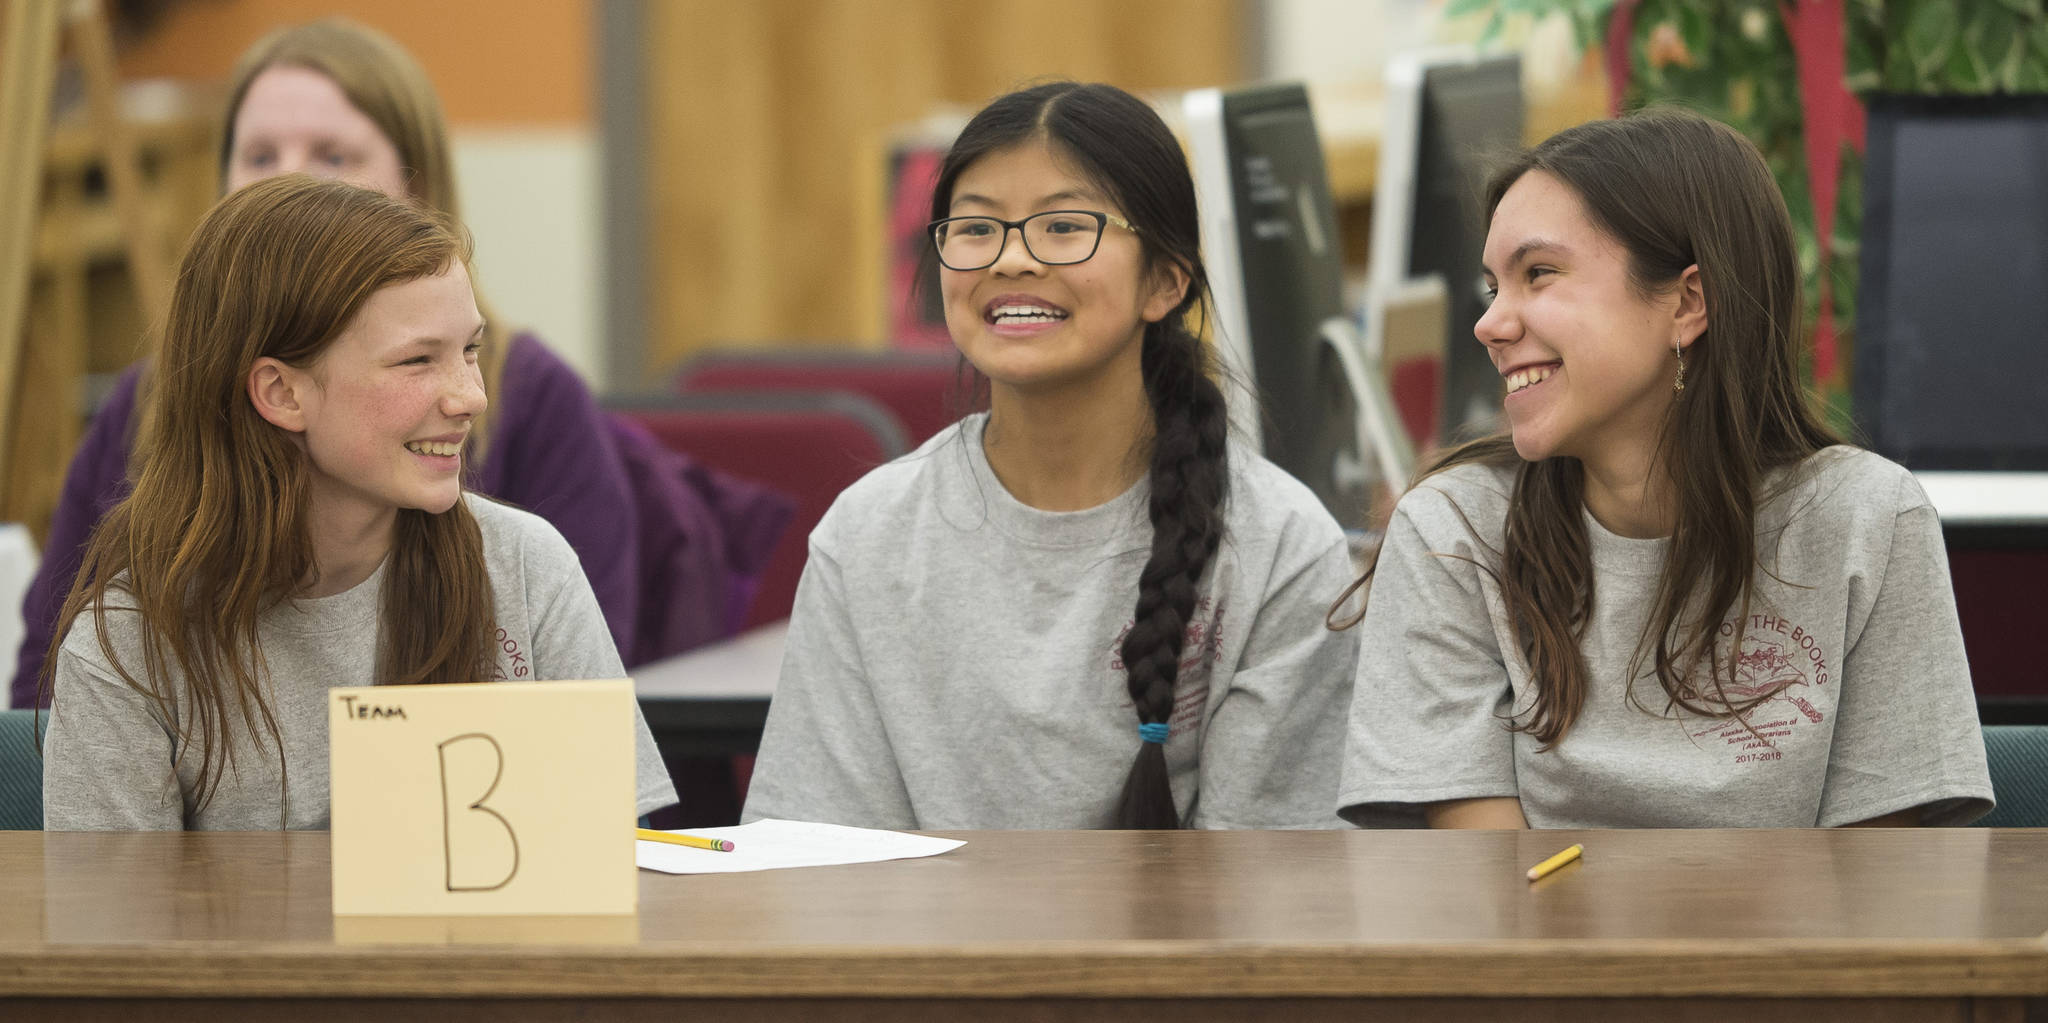 Annika Schwartz, left, Jinyue Trowsil, center, and Clara Don, all eighth grade students at Montessori Borealis, react with smiles after winning the Juneau School District final in the Battle of the Books at Floyd Dryden Middle School on Thursday, Feb. 8, 2018. (Michael Penn | Juneau Empire)